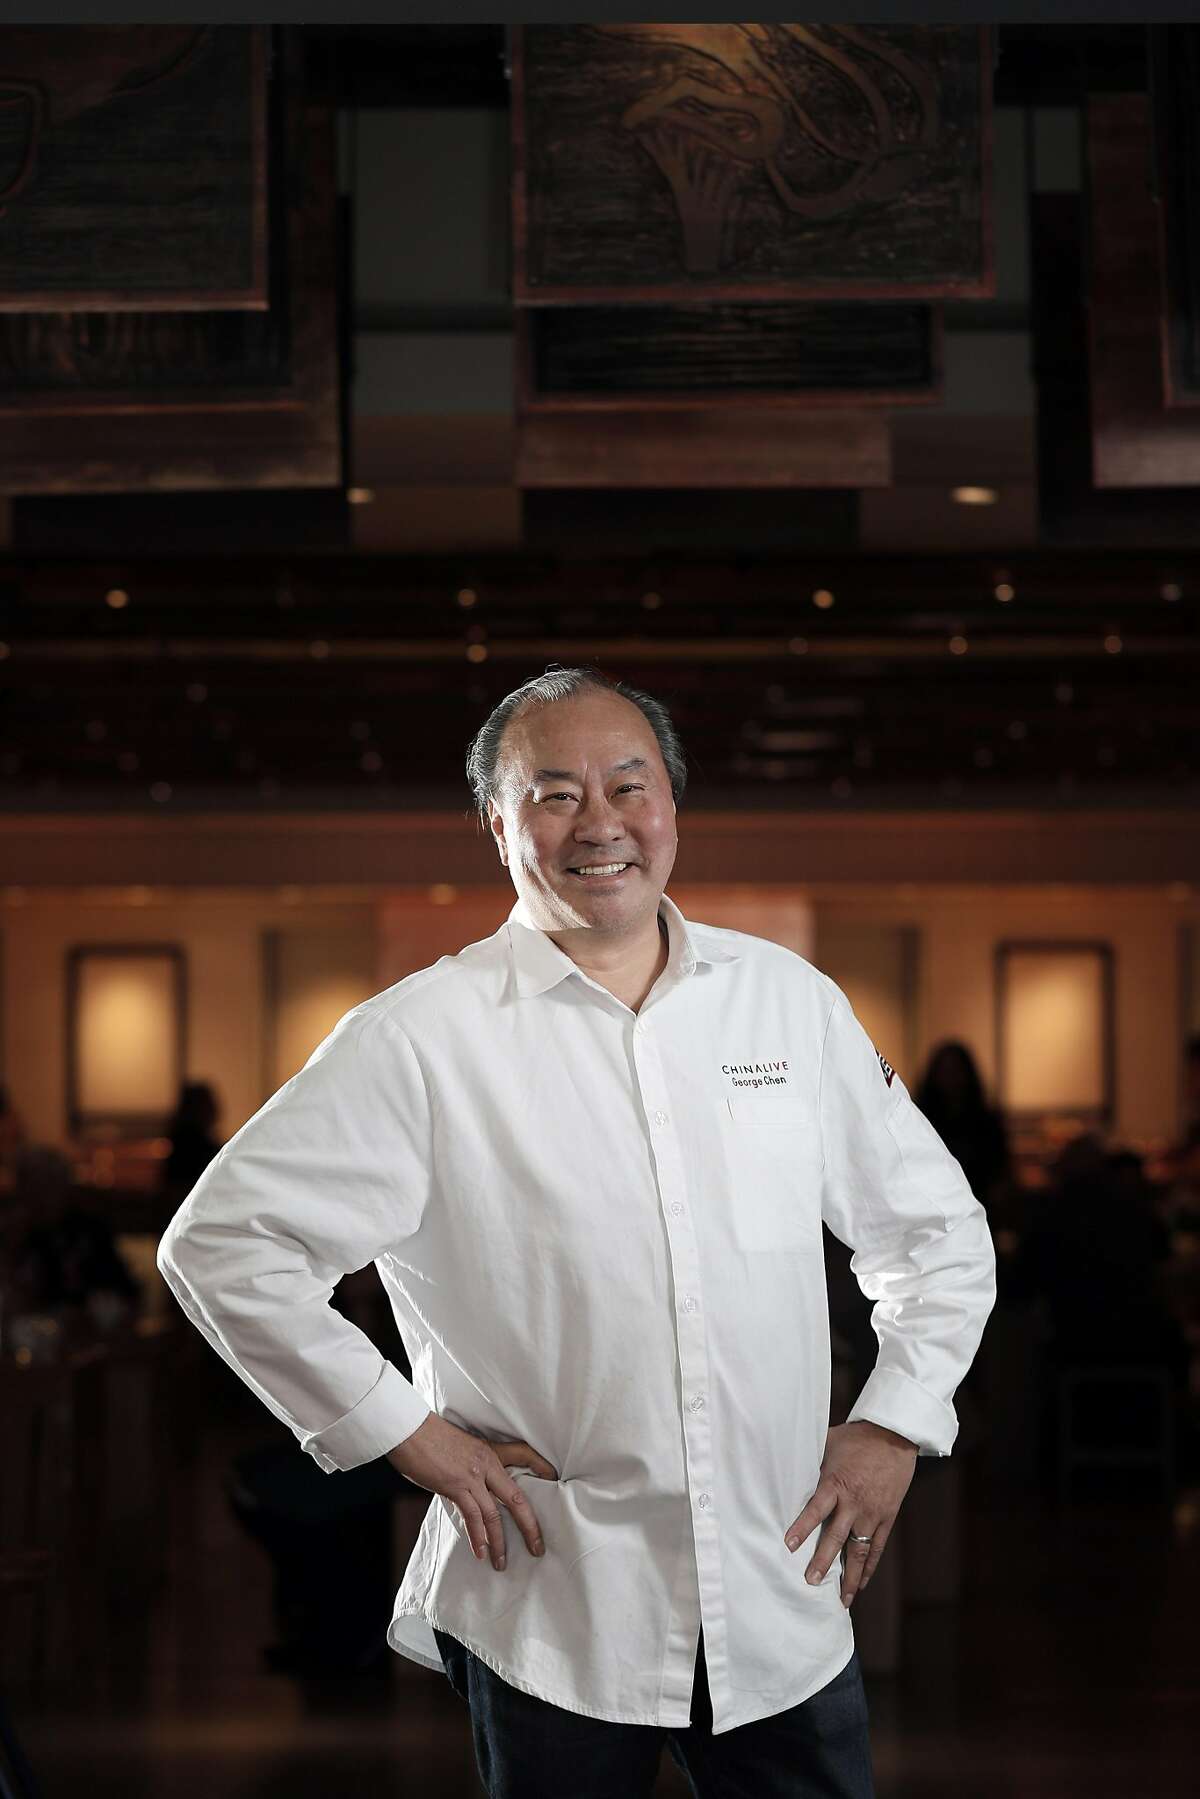 Chef George Chen at China Live in San Francisco, Calif., on Wednesday, April 26, 2017. China Live is the new ambitious restaurant and Chinese food emporium in Chinatown.